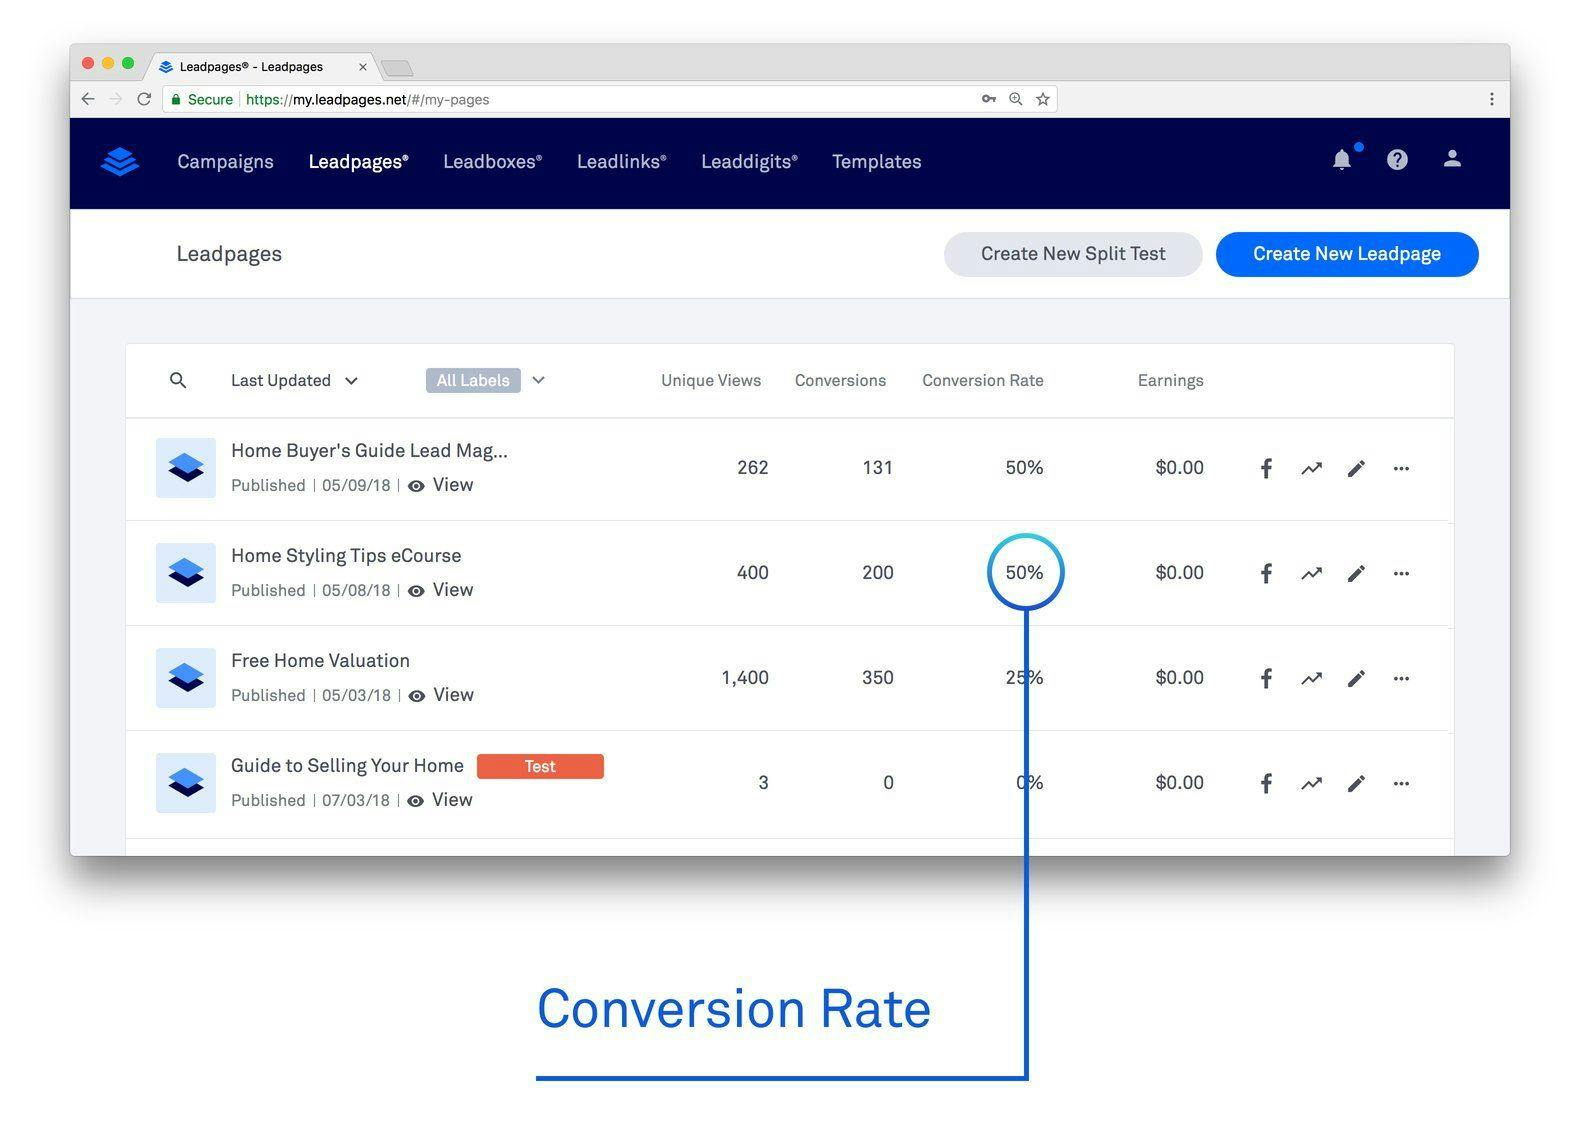 What is my conversion rate on landing page